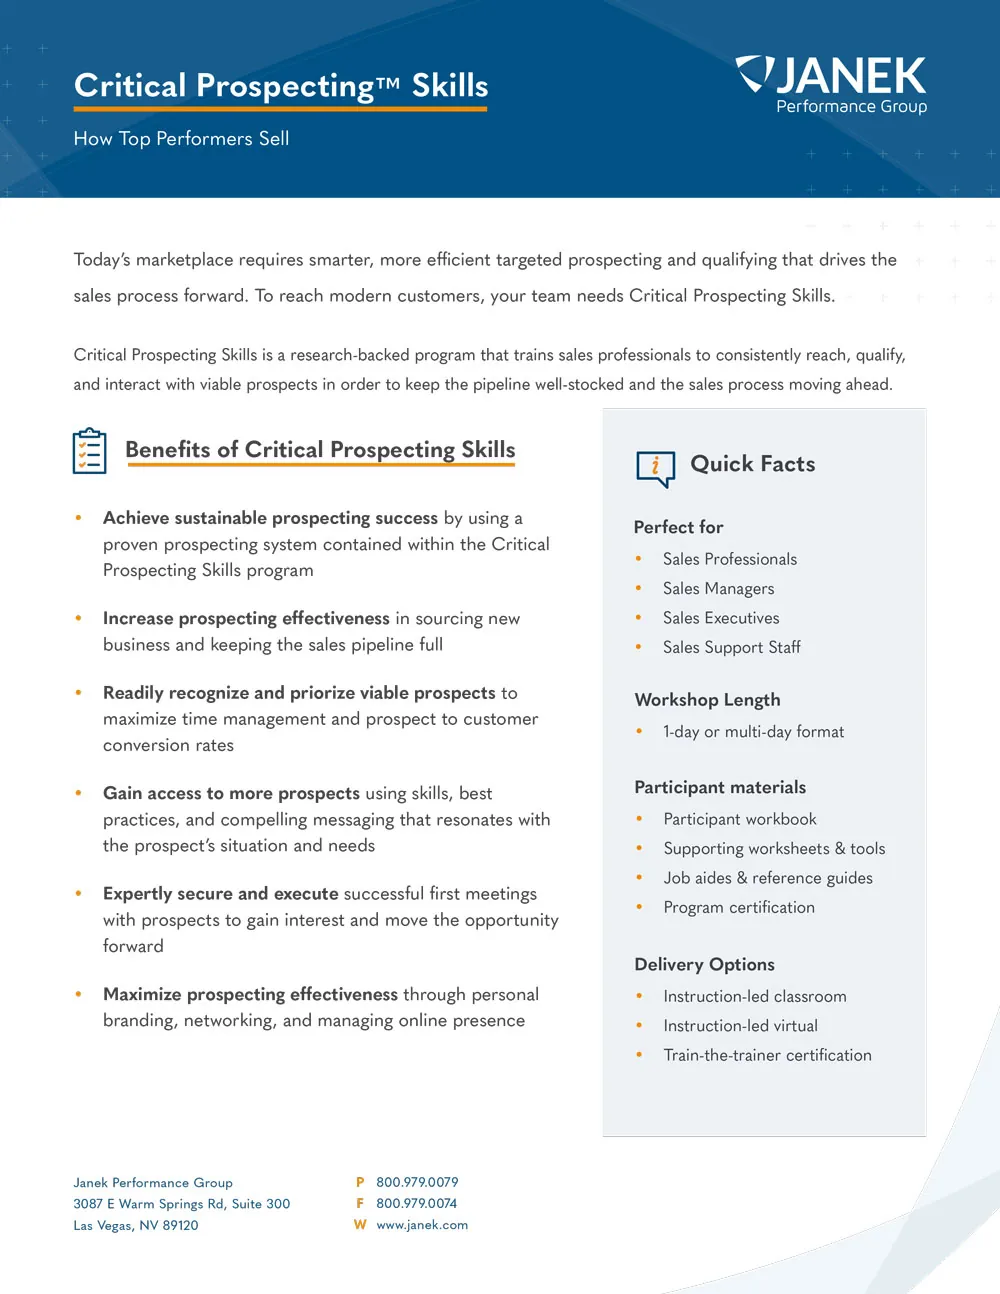 Download the Critical Prospecting Skills Brochure